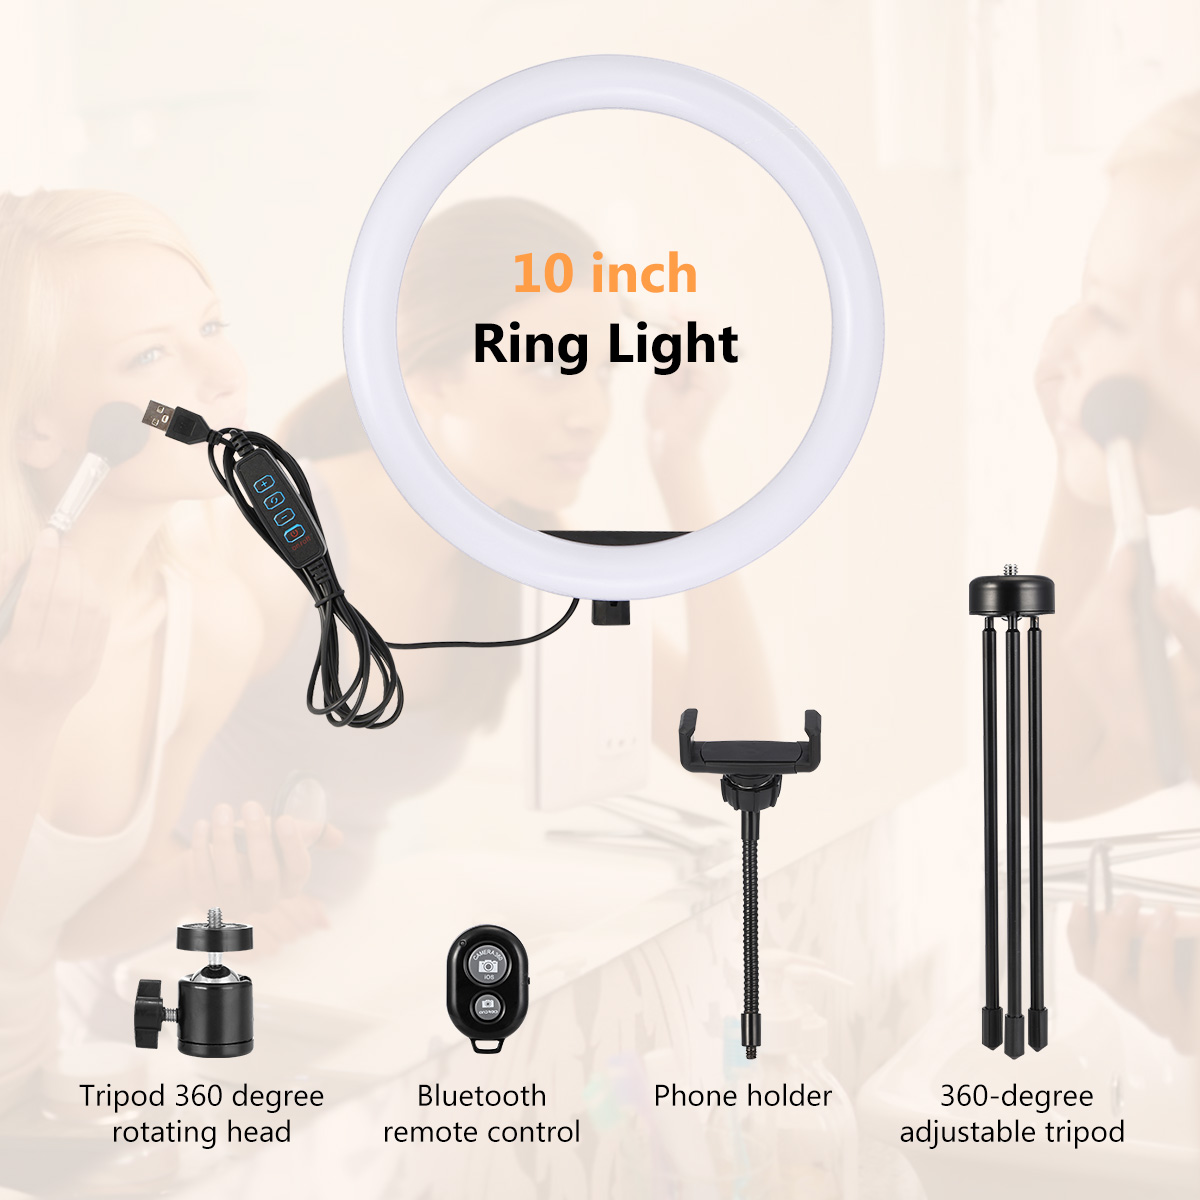 MOHOO 10 inch 3 Color Modes 10 Brightness Levels USB Video Light with 360 Degree Rotation Head Tripod for Tik Tok Youtube Live Streaming